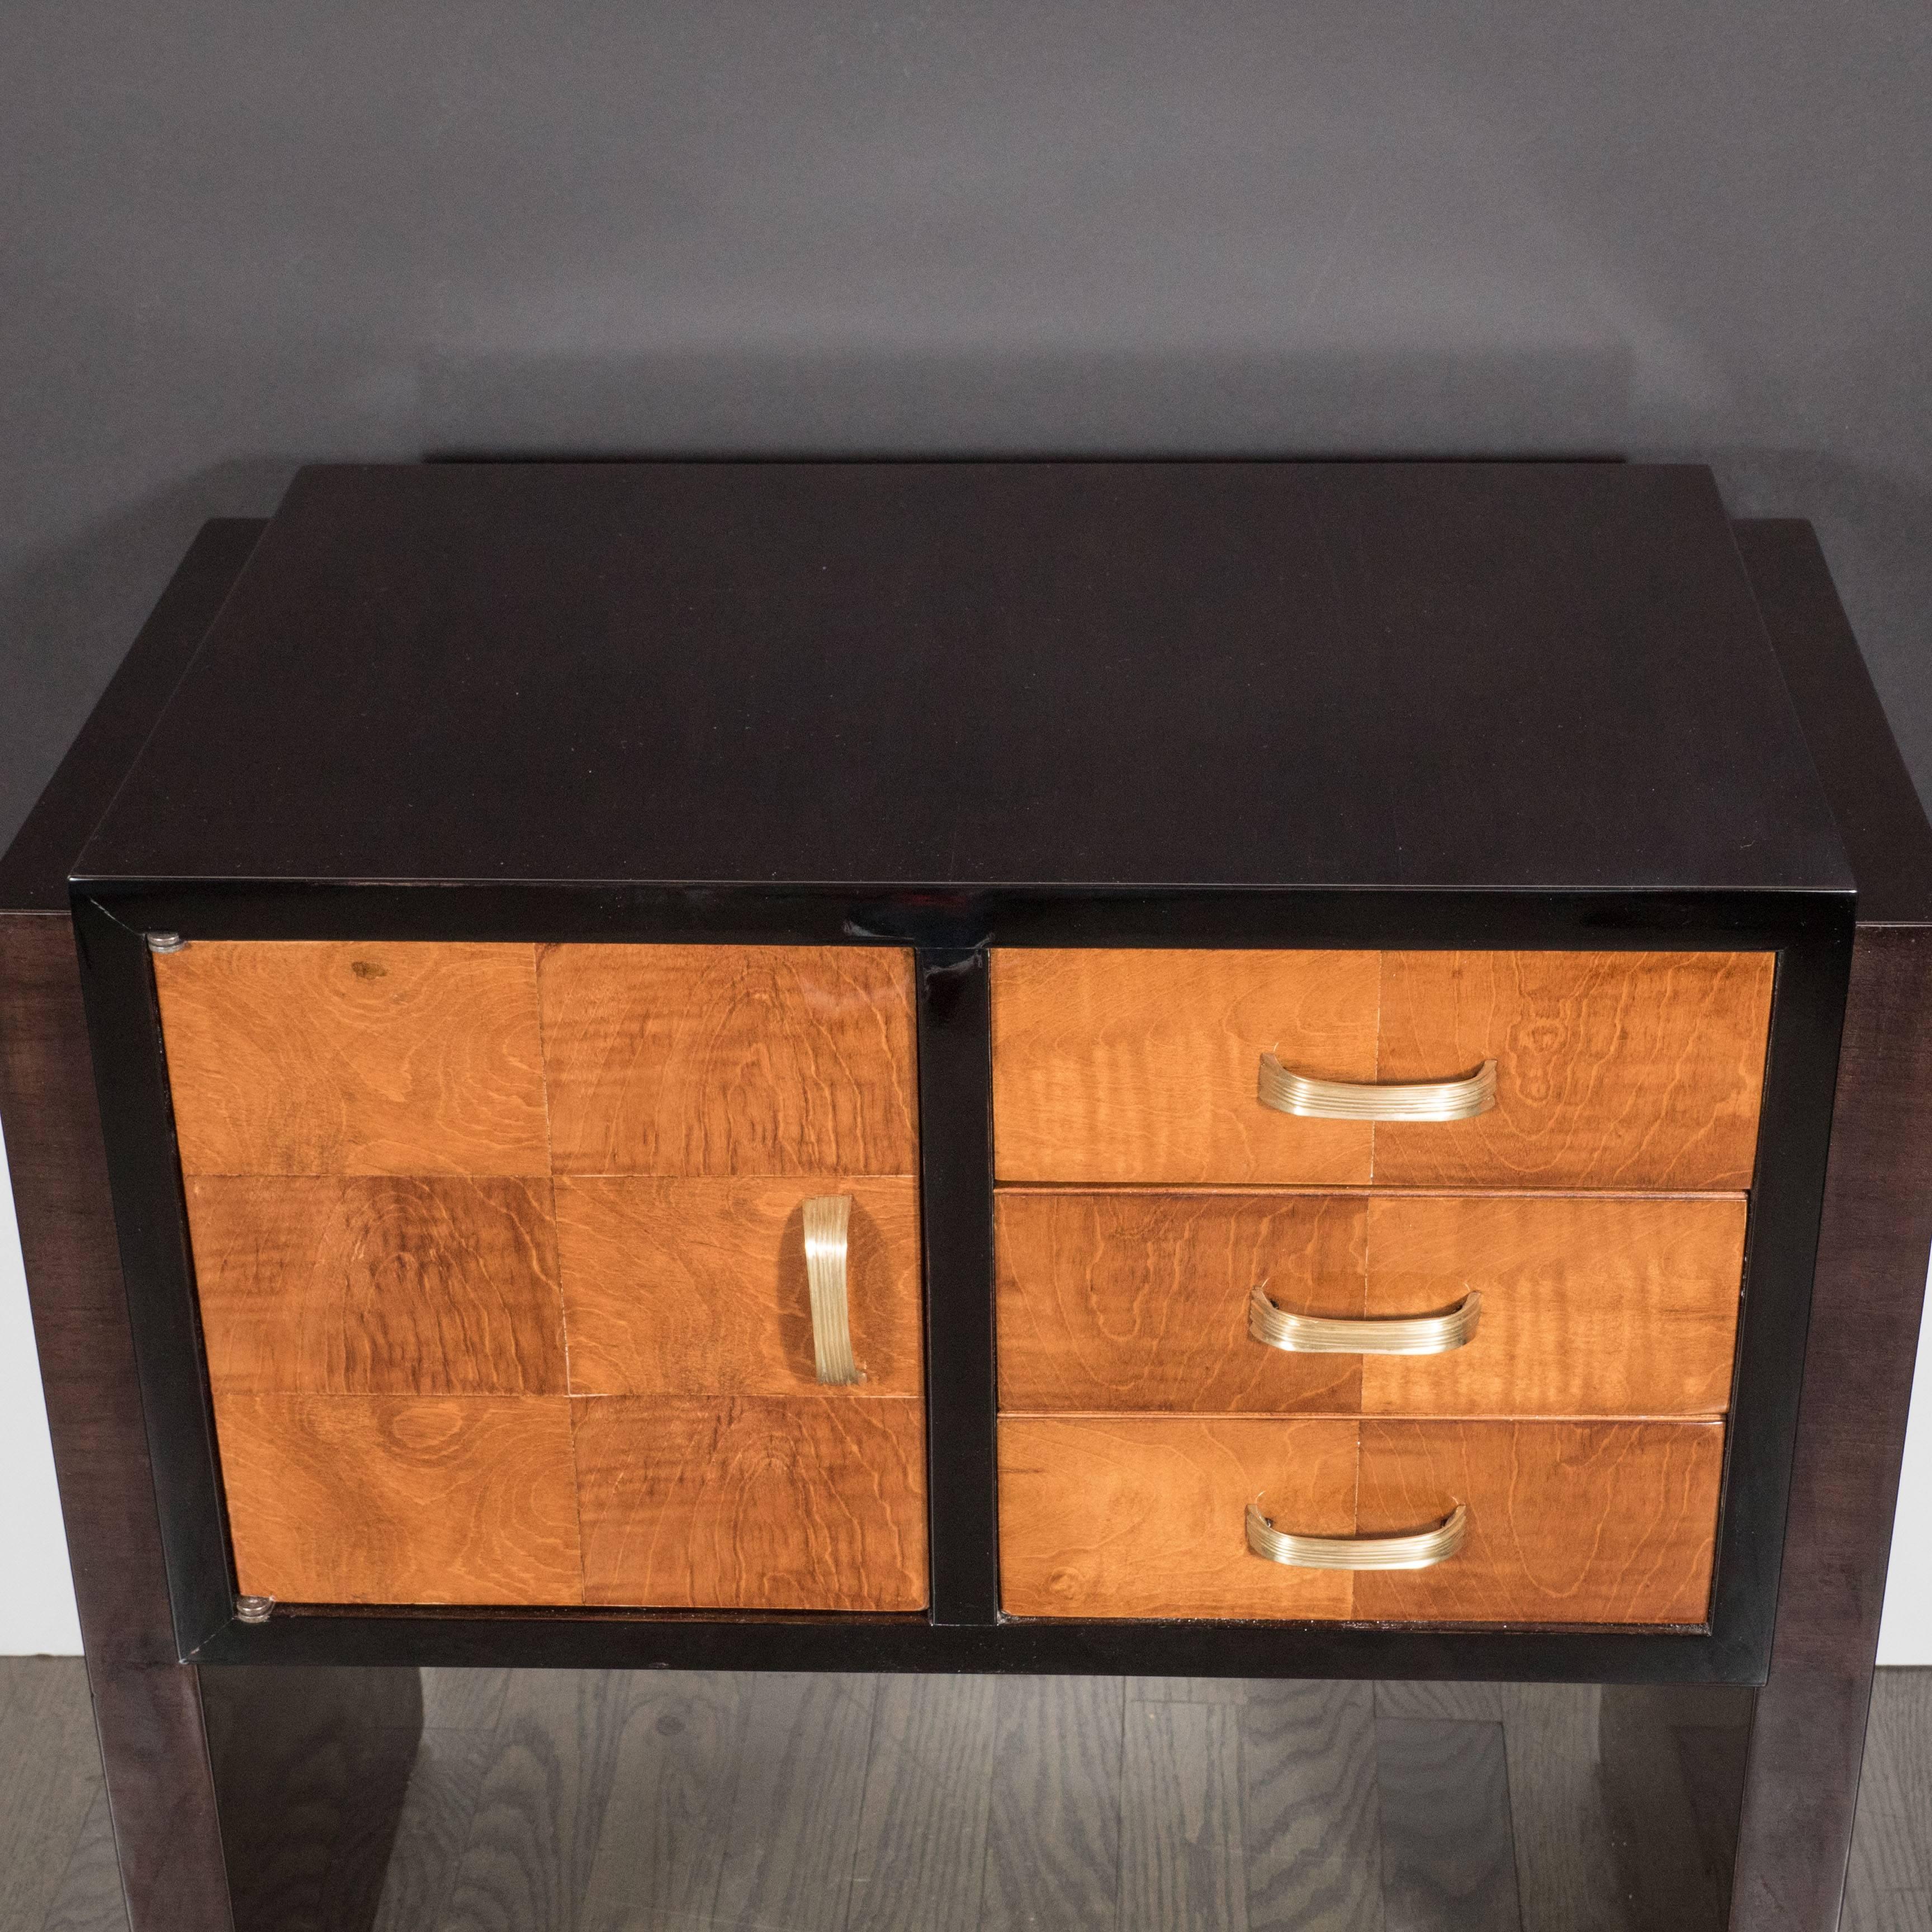 Mid-20th Century Pair of Art Deco Nightstands or End Tables in Burled Elm and Ebonized Walnut